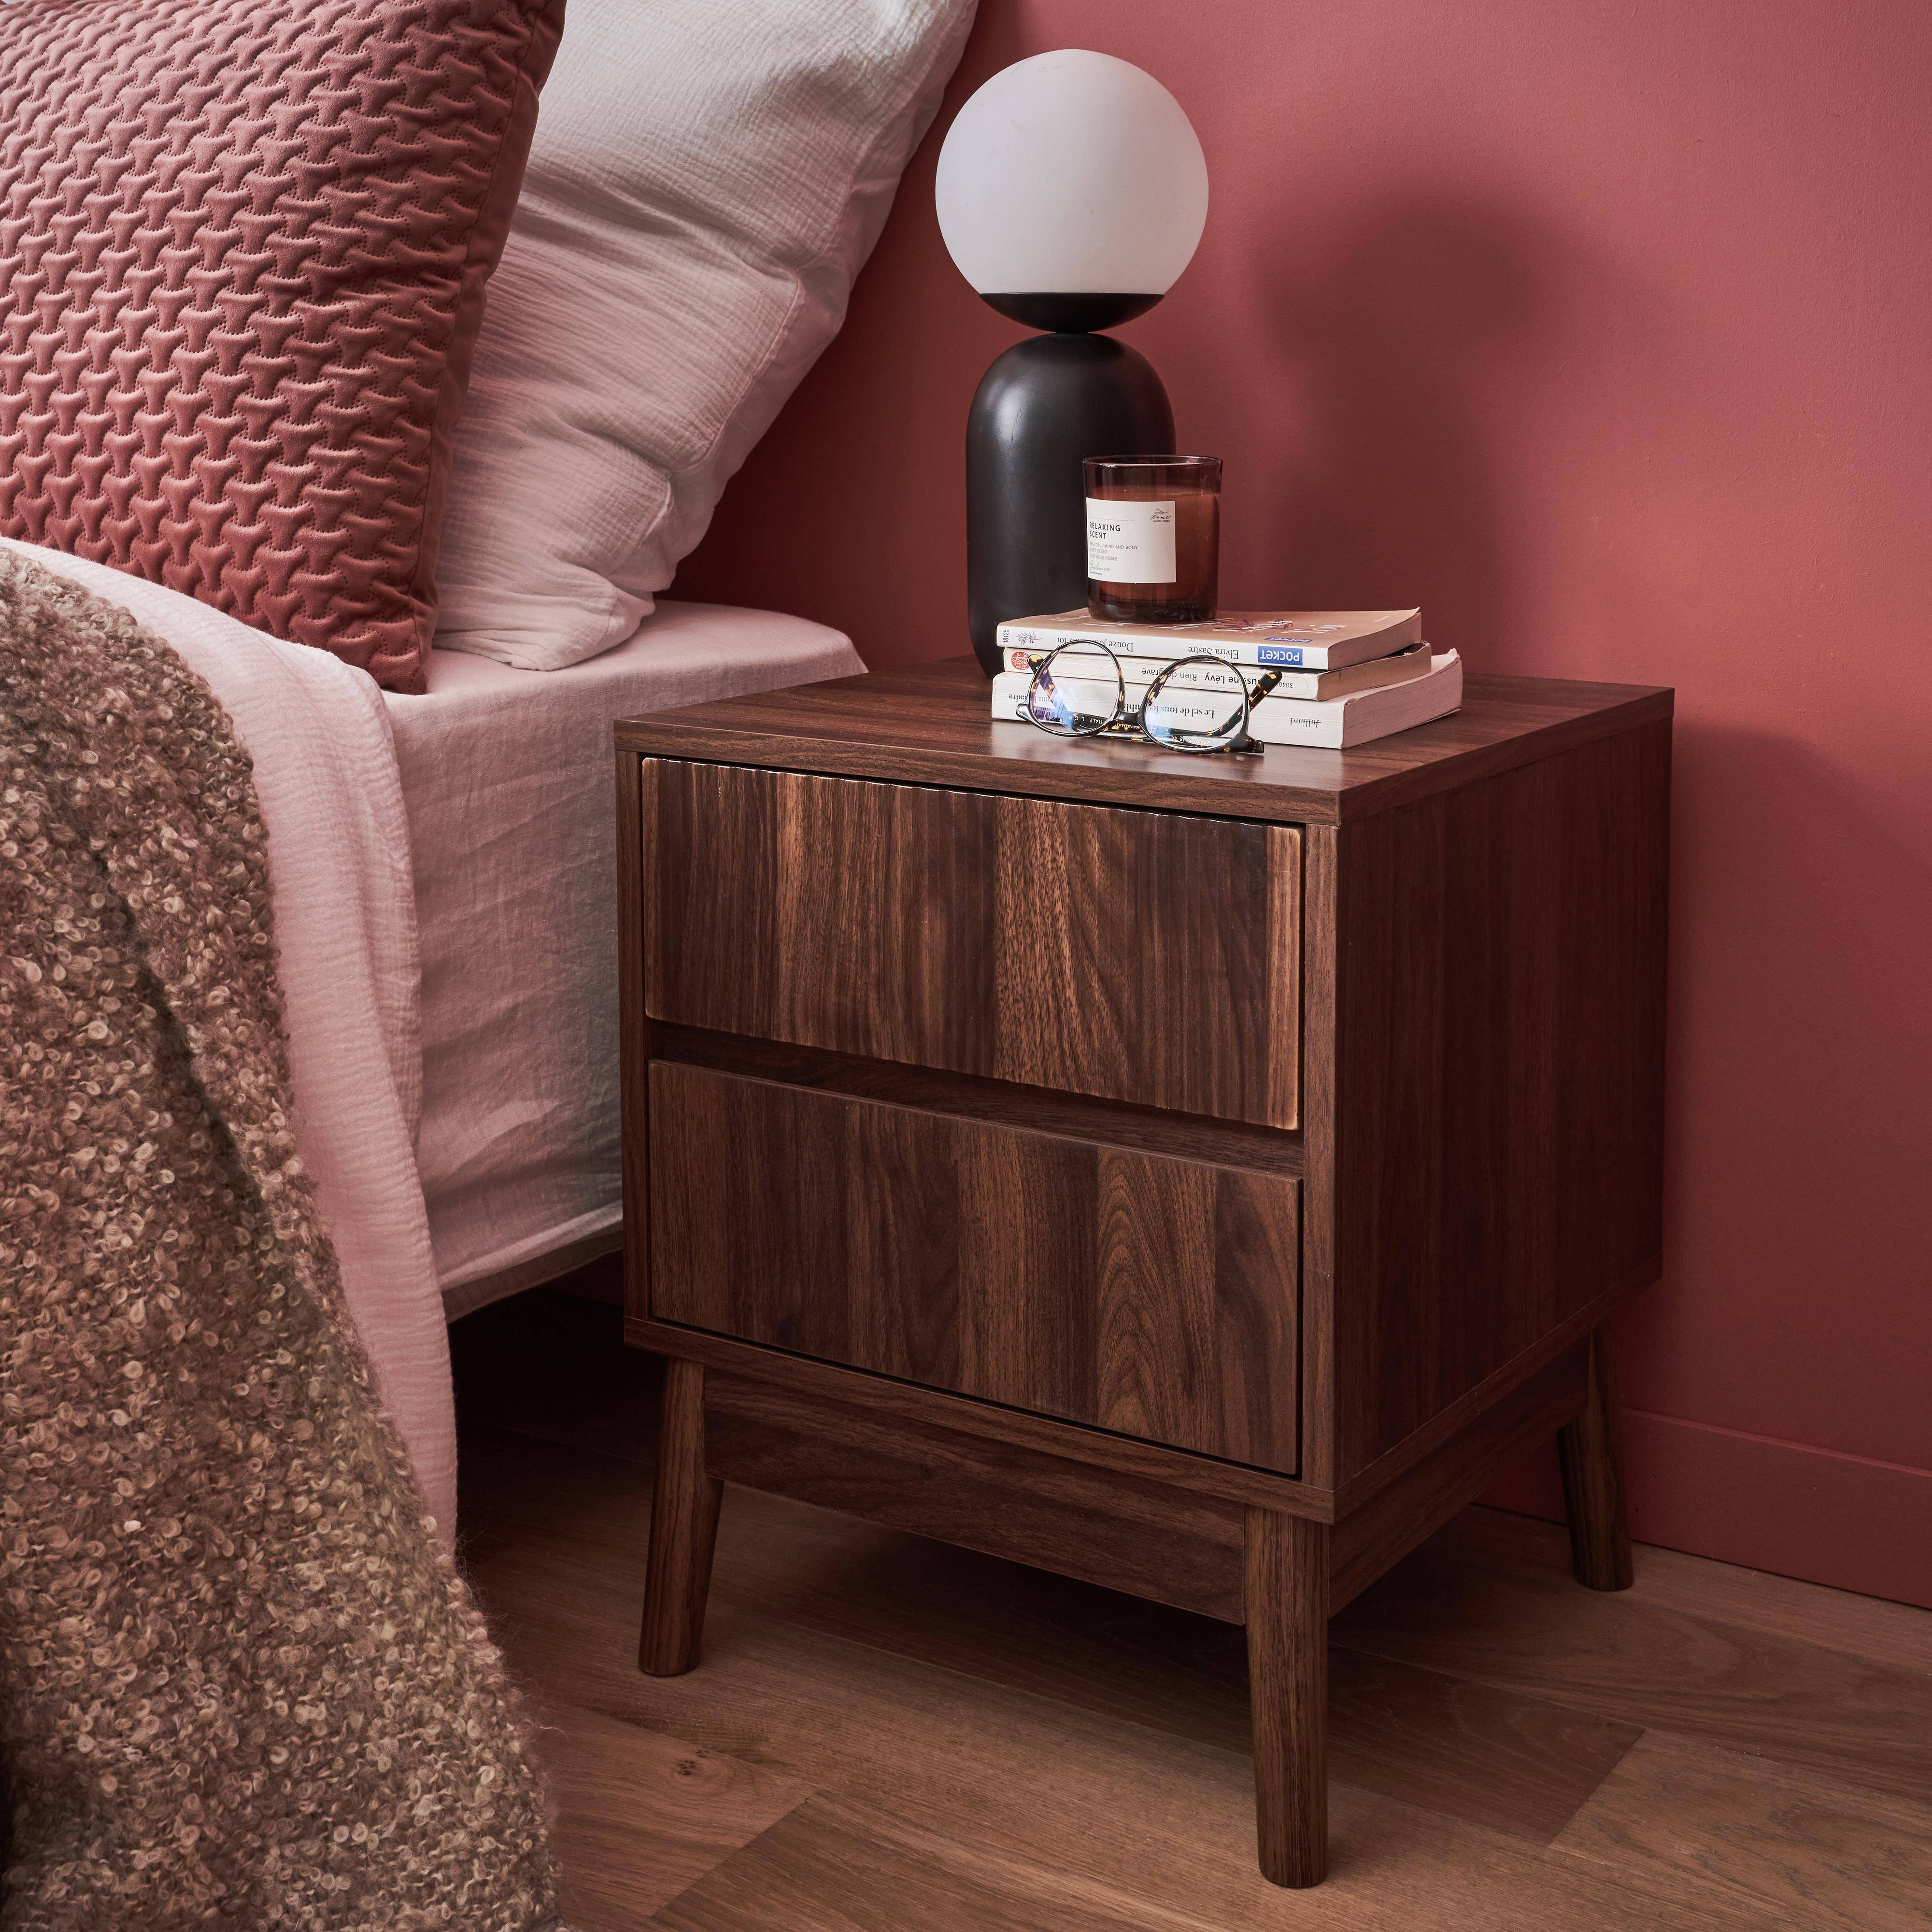 Pair of grooved wooden bedside tables with 2 drawers, 40x39x48cm - Linear - Dark Wood colour,sweeek,Photo2